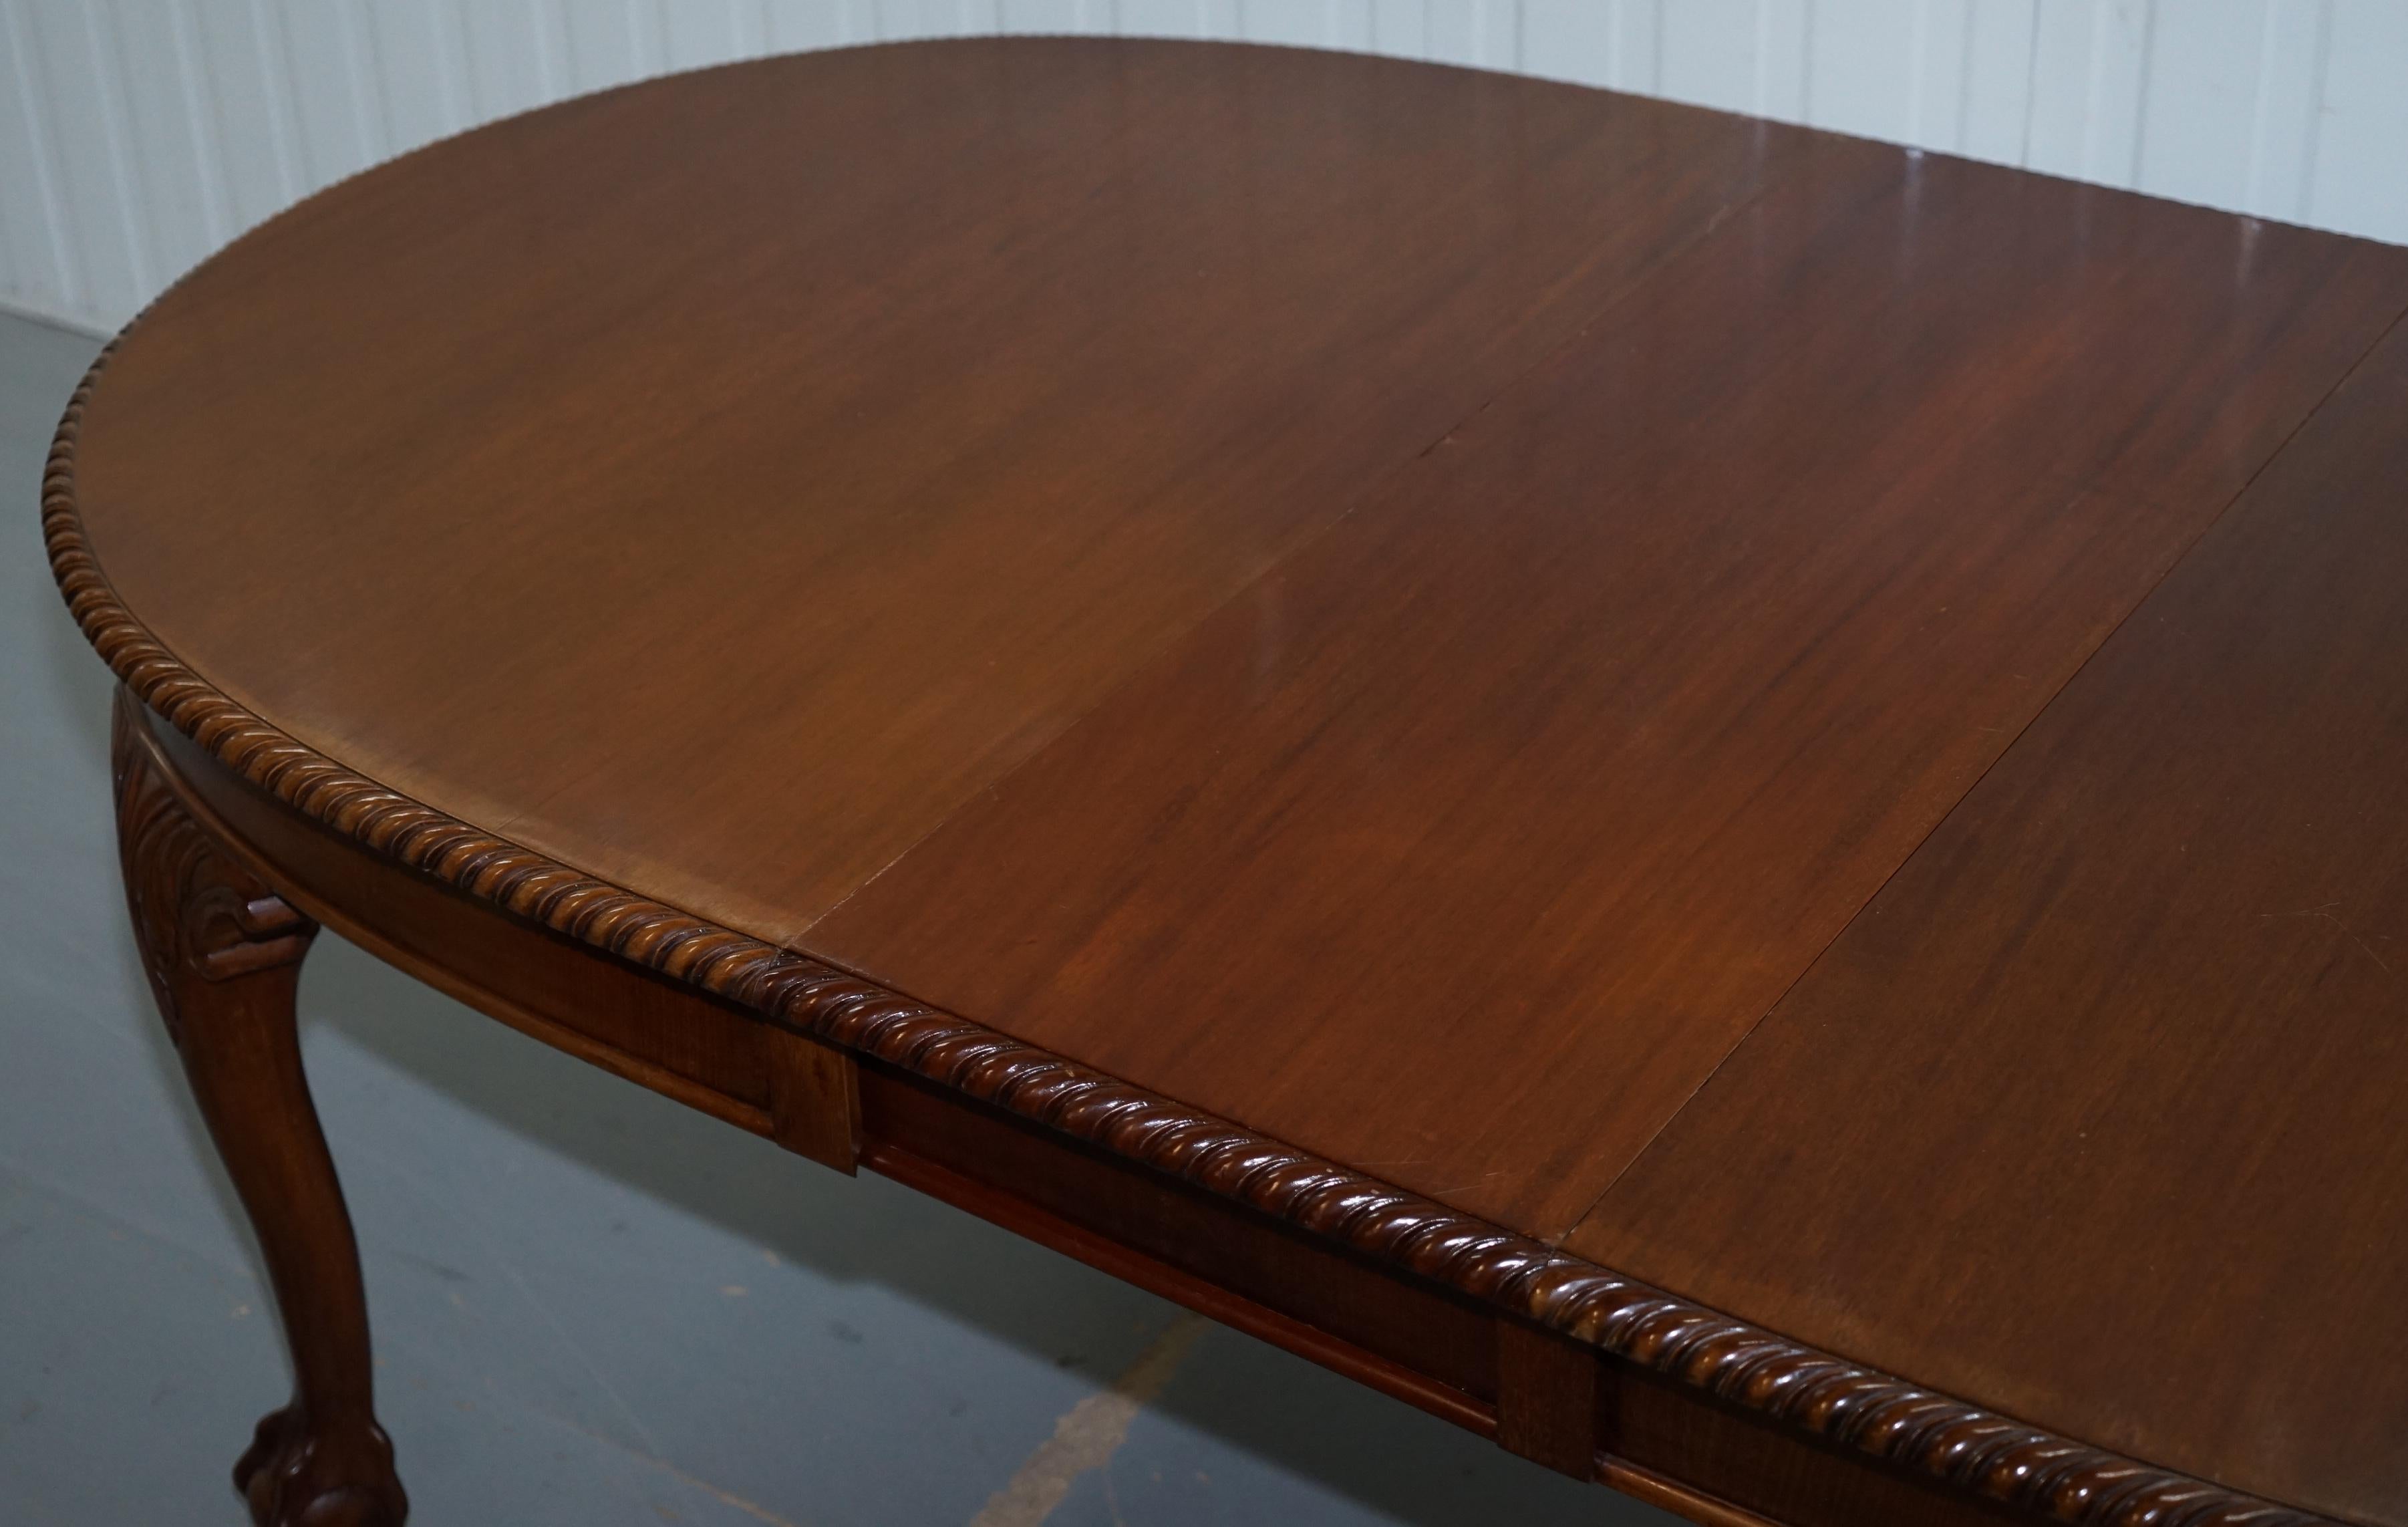 1920s Solid Walnut Extending Dining Table Large Claw and Ball Feet Seats 4 to 8 1